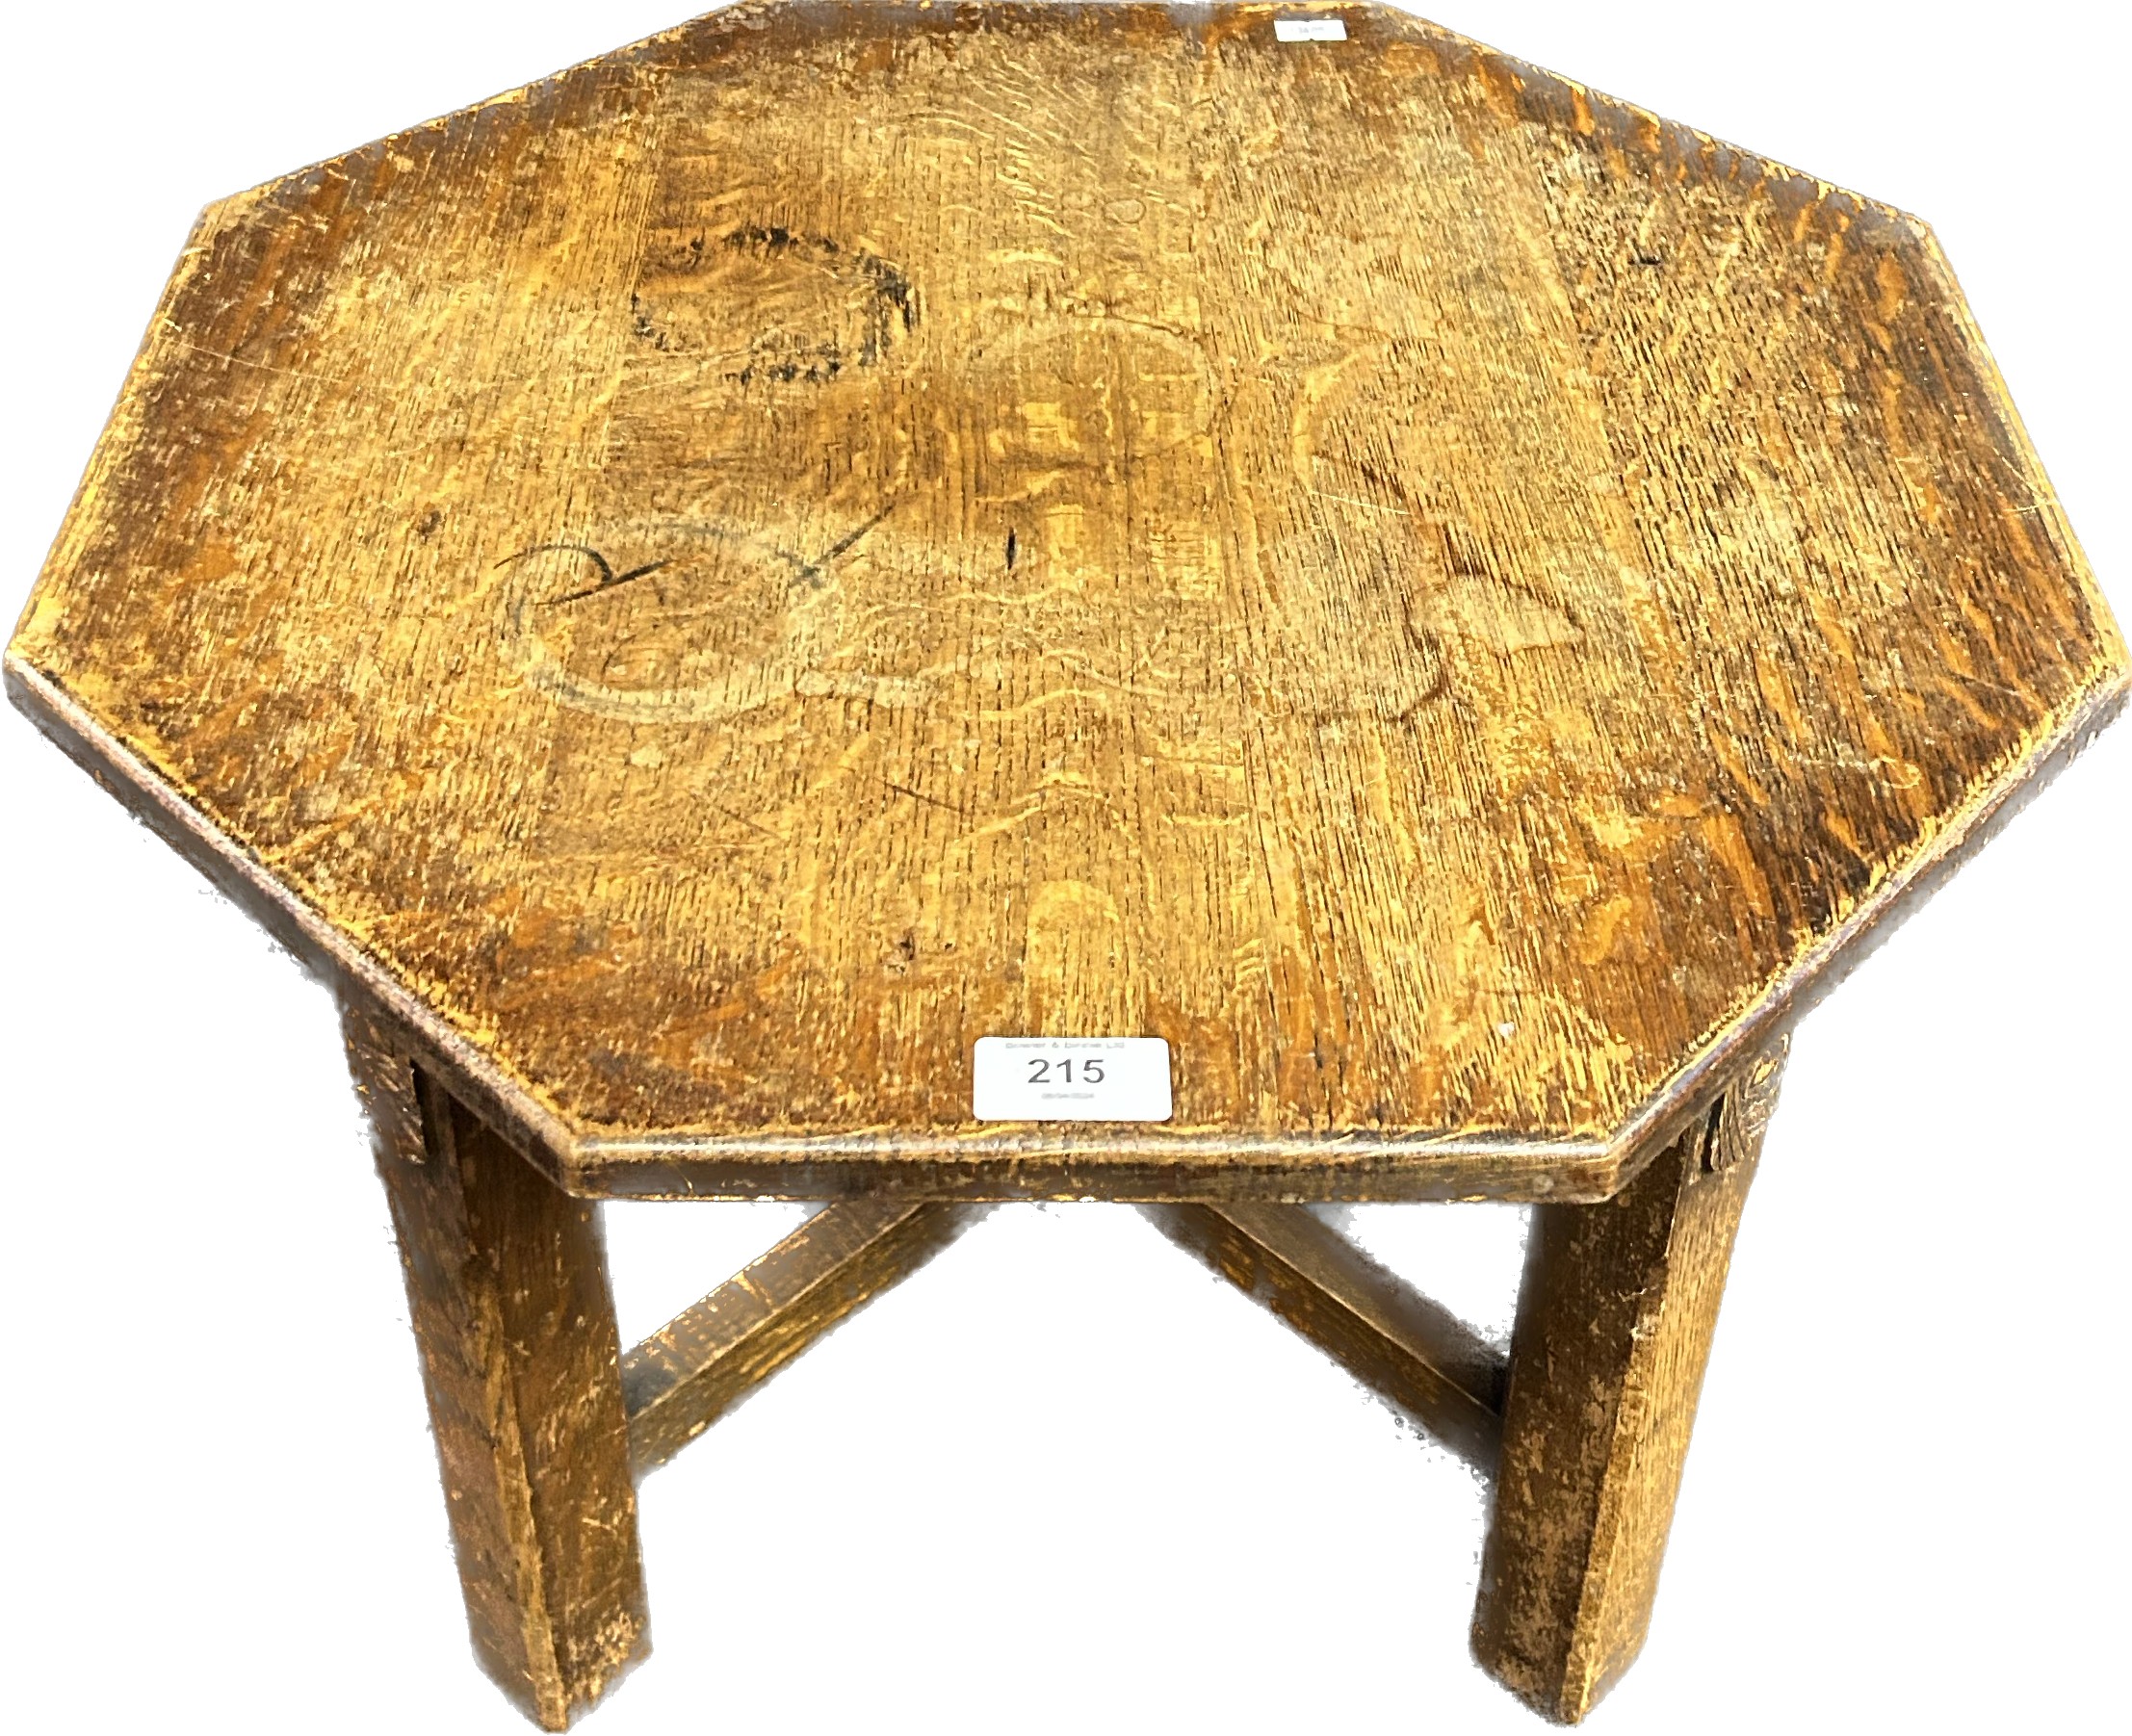 Antique oak octagonal table raised on blocked carved legs supported by a stretcher. - Image 2 of 3